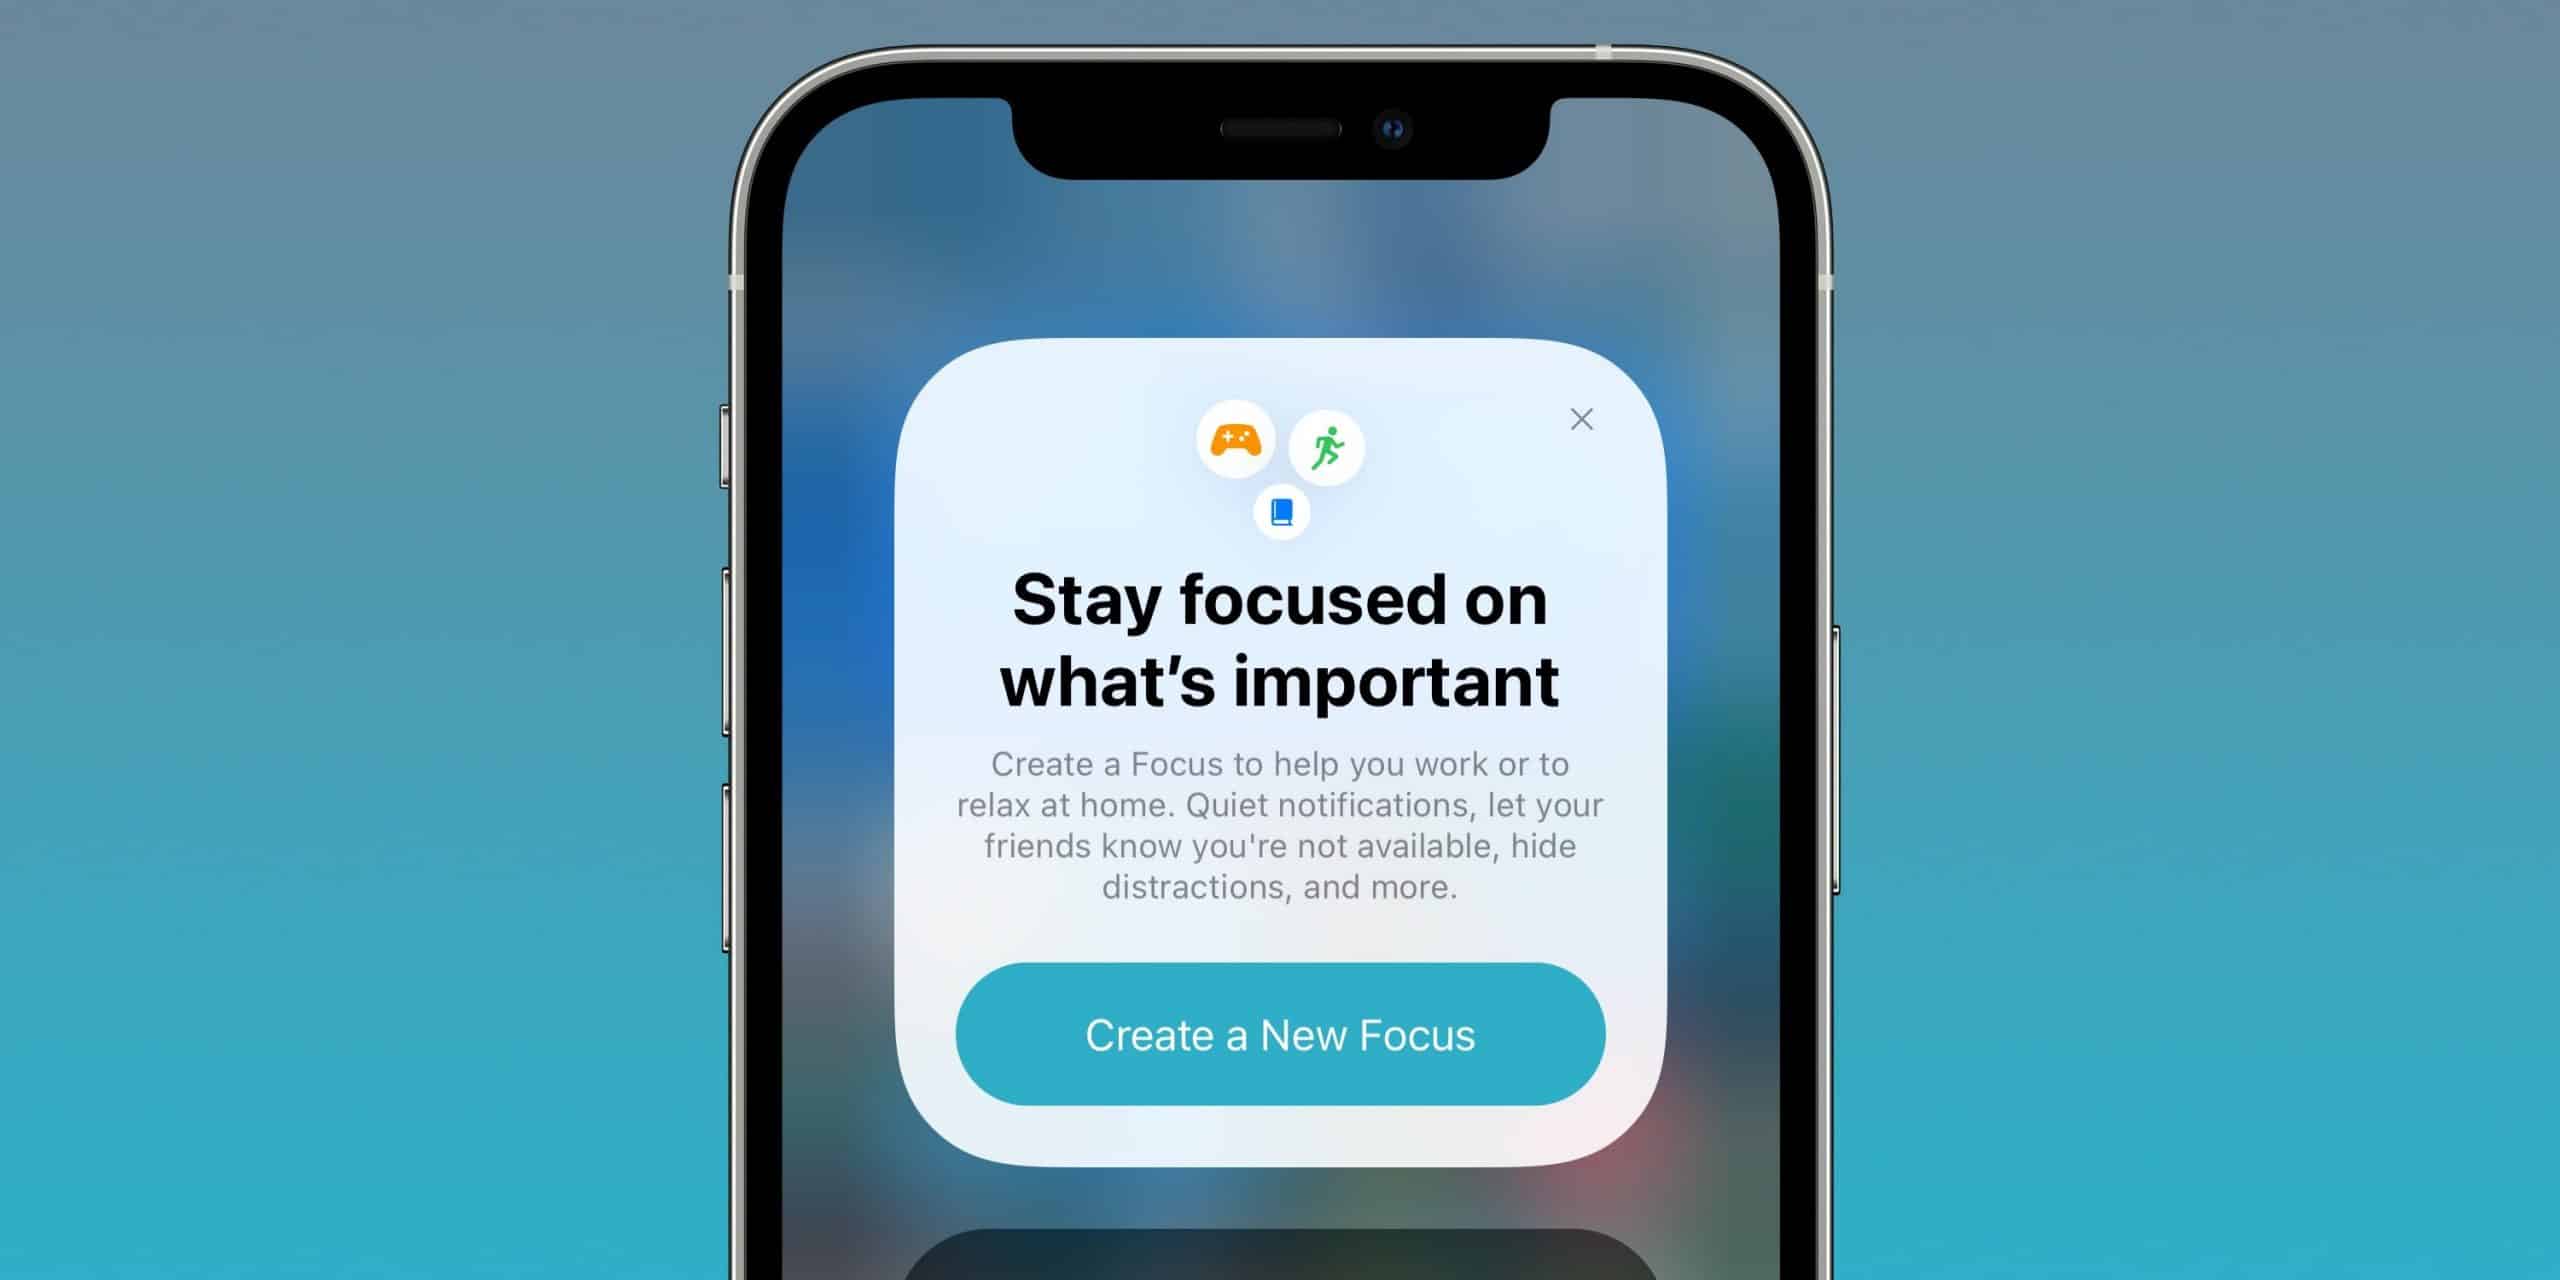 iOS 15 brings new focus features to manage notifications